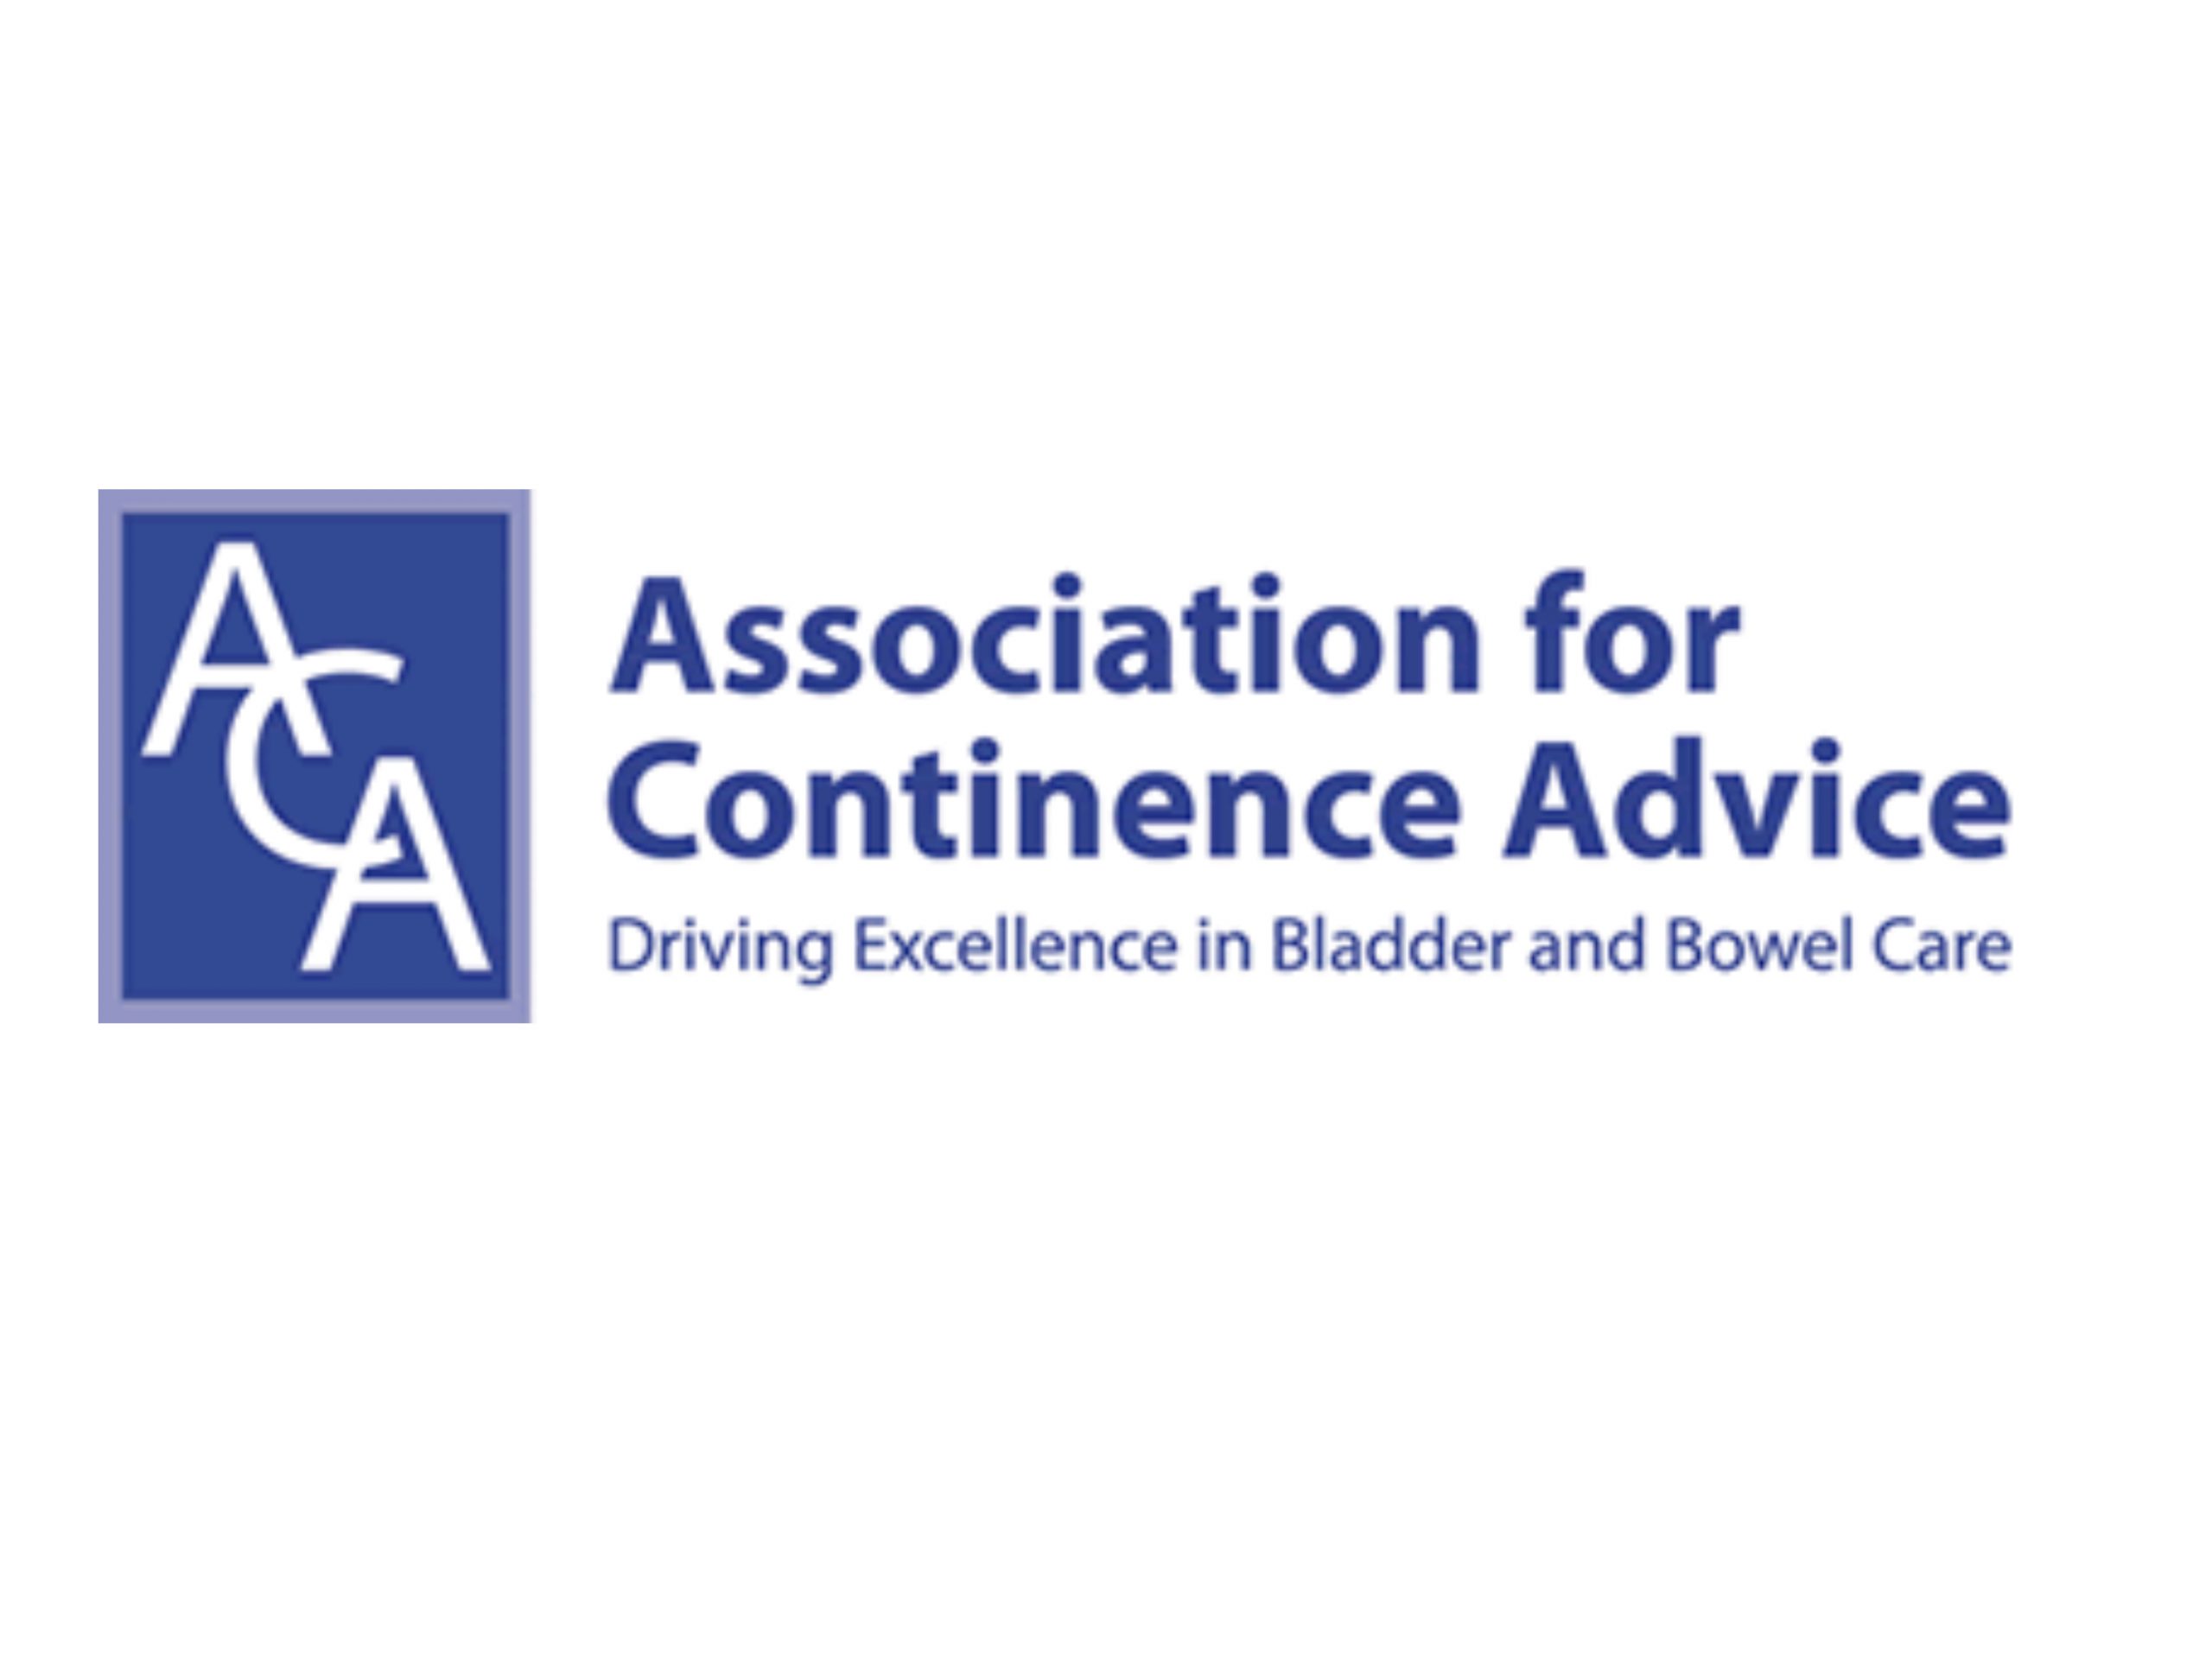 Association for Continence Advice